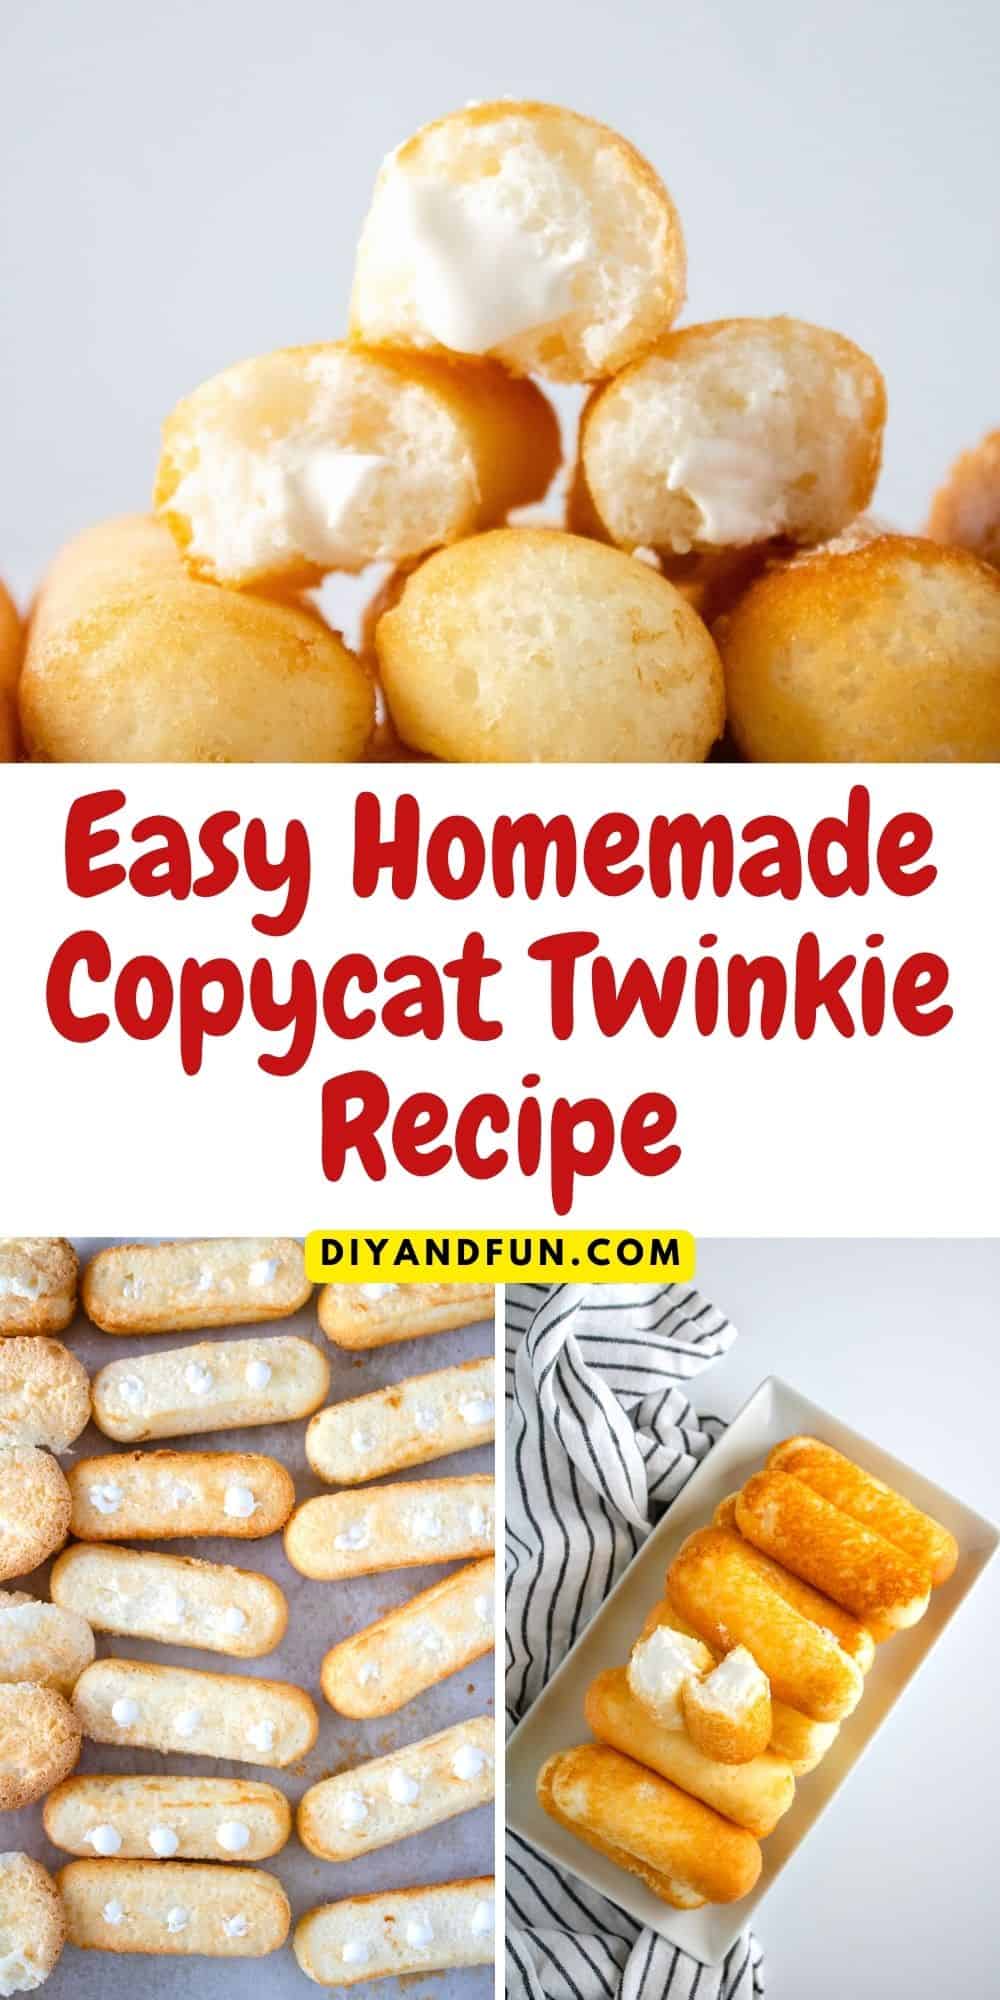 Easy Homemade Copycat Twinkie Recipe, a serious homemade snack or dessert recipe that tastes just like the real thing!